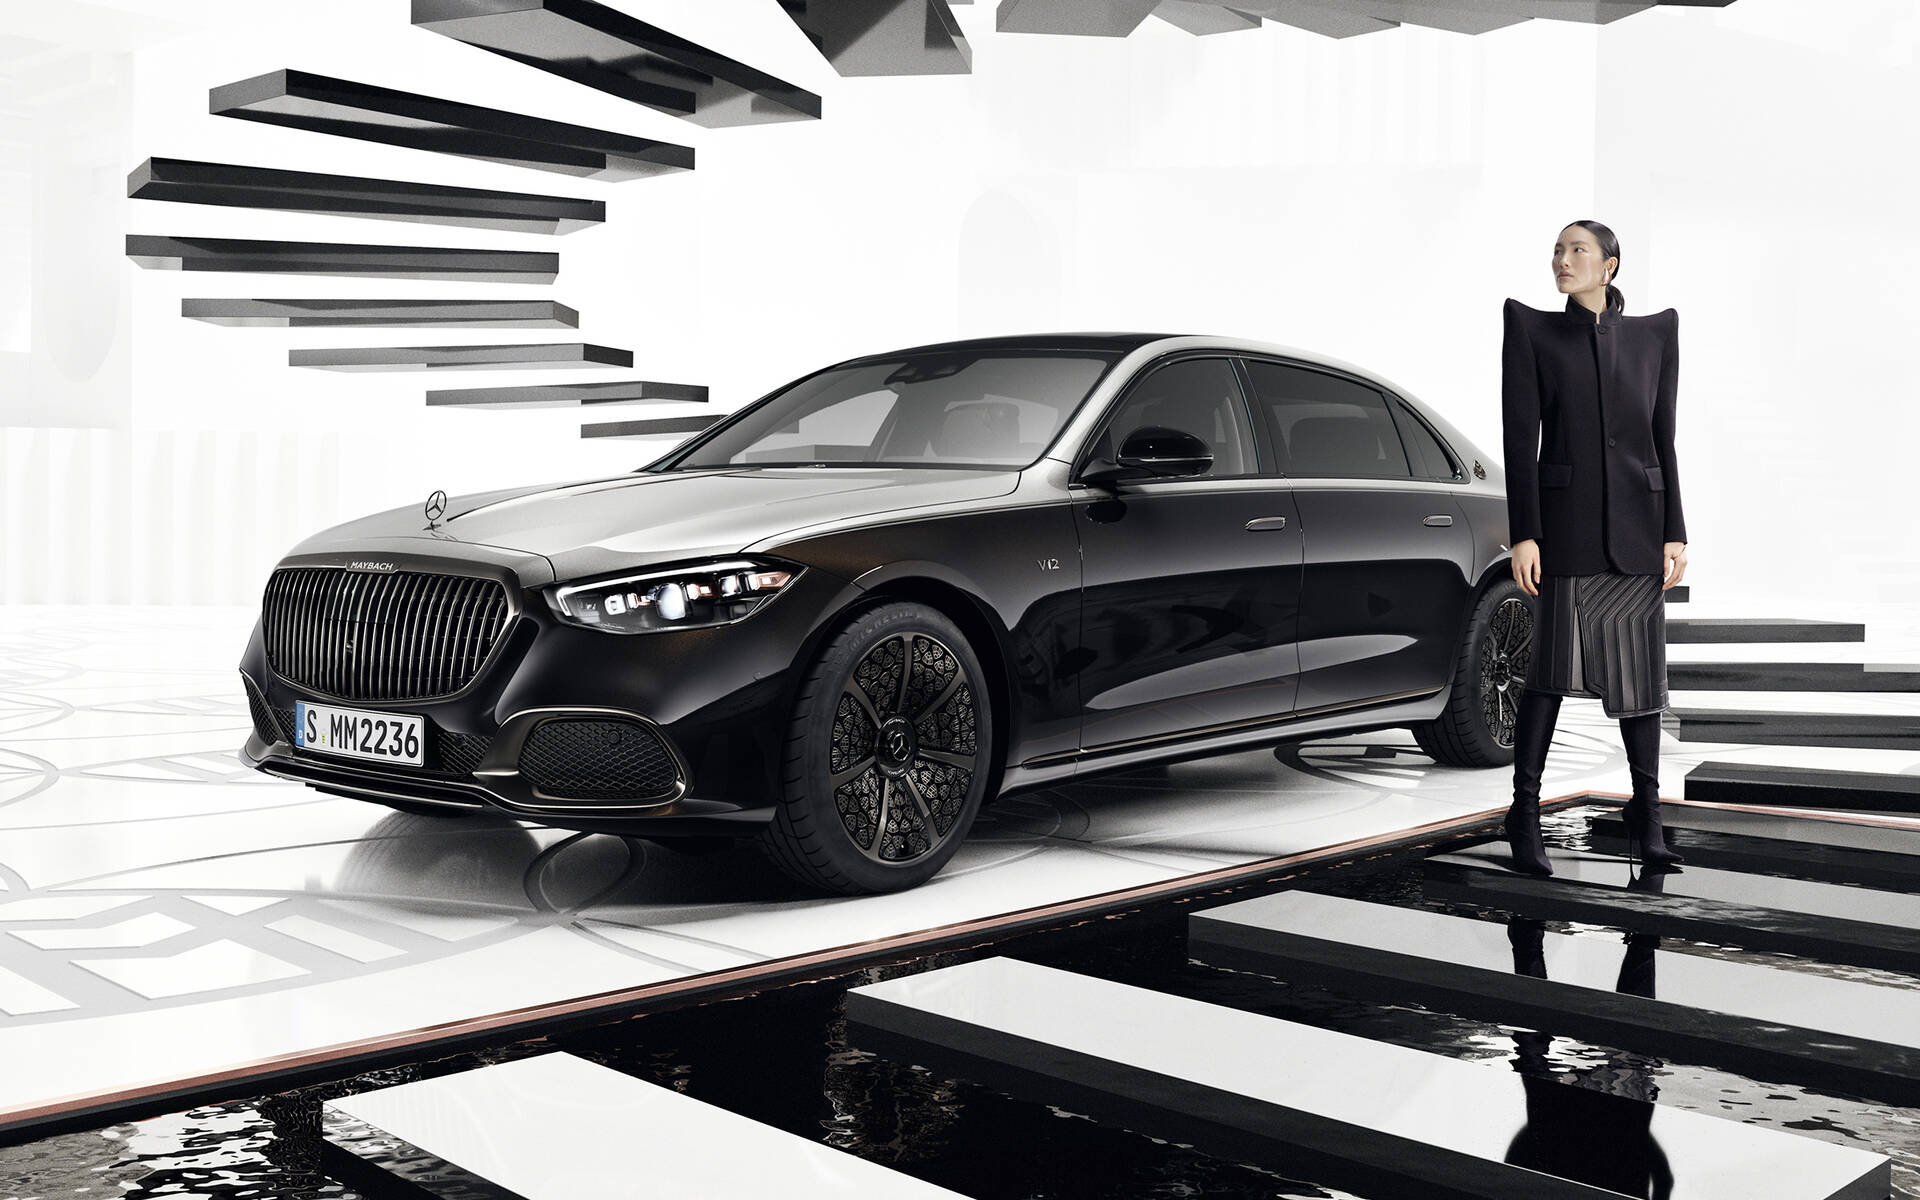 Mercedes-Maybach reveals collaboration with late fashion designer